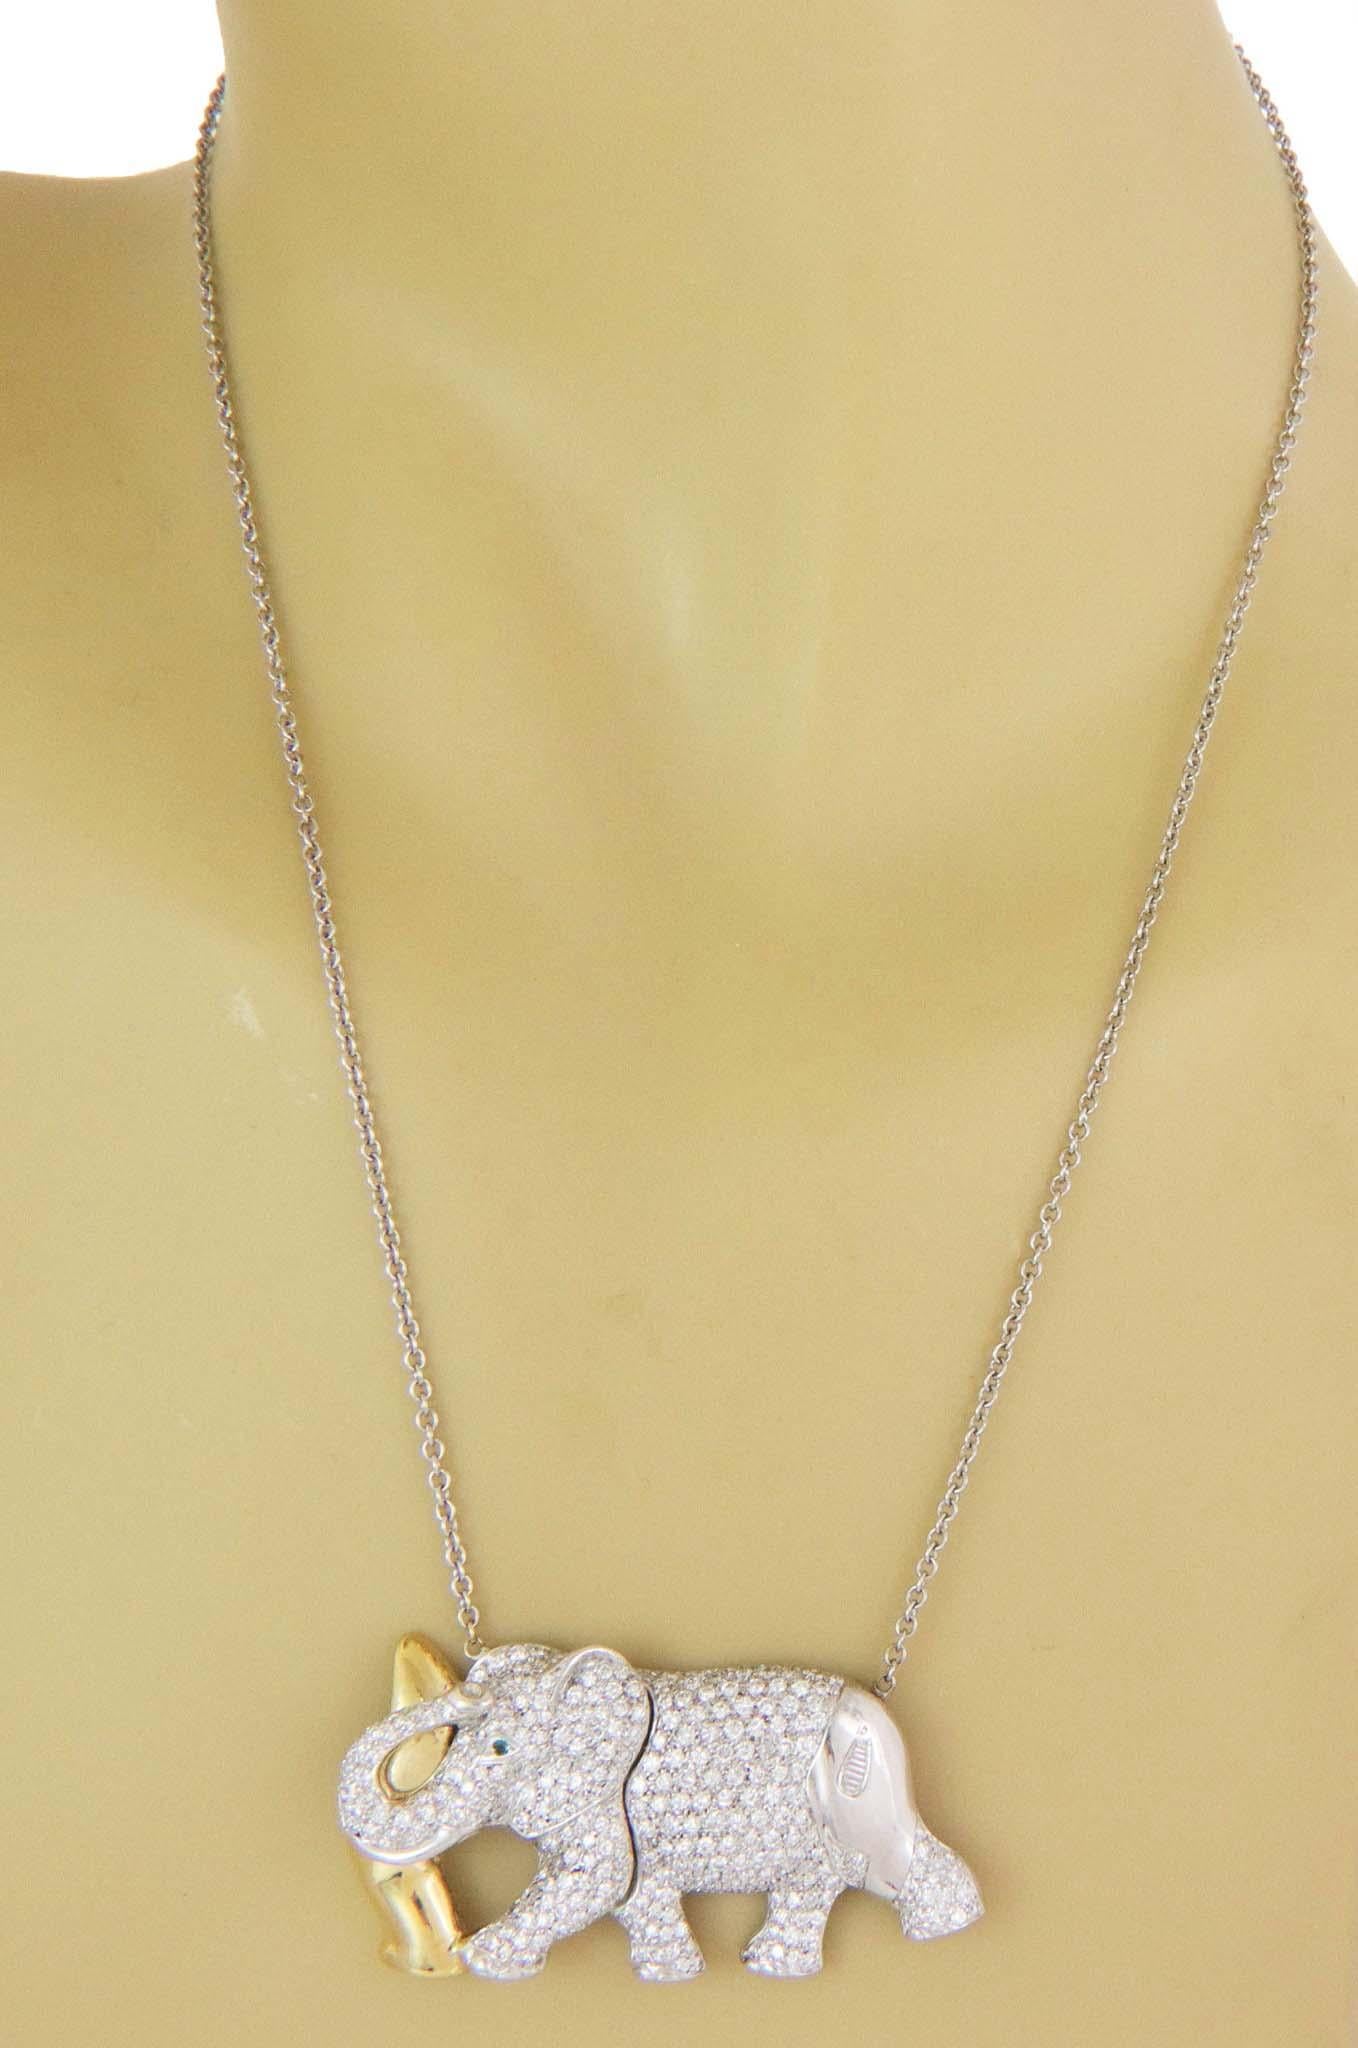 Adorable and authentic by Nova Italy, this beautiful elephant pendant and chain is crafted from 18k white and yellow gold. The classic oval link chain is attached to the pendant featuring a large standing elephant in white gold fully decorated with